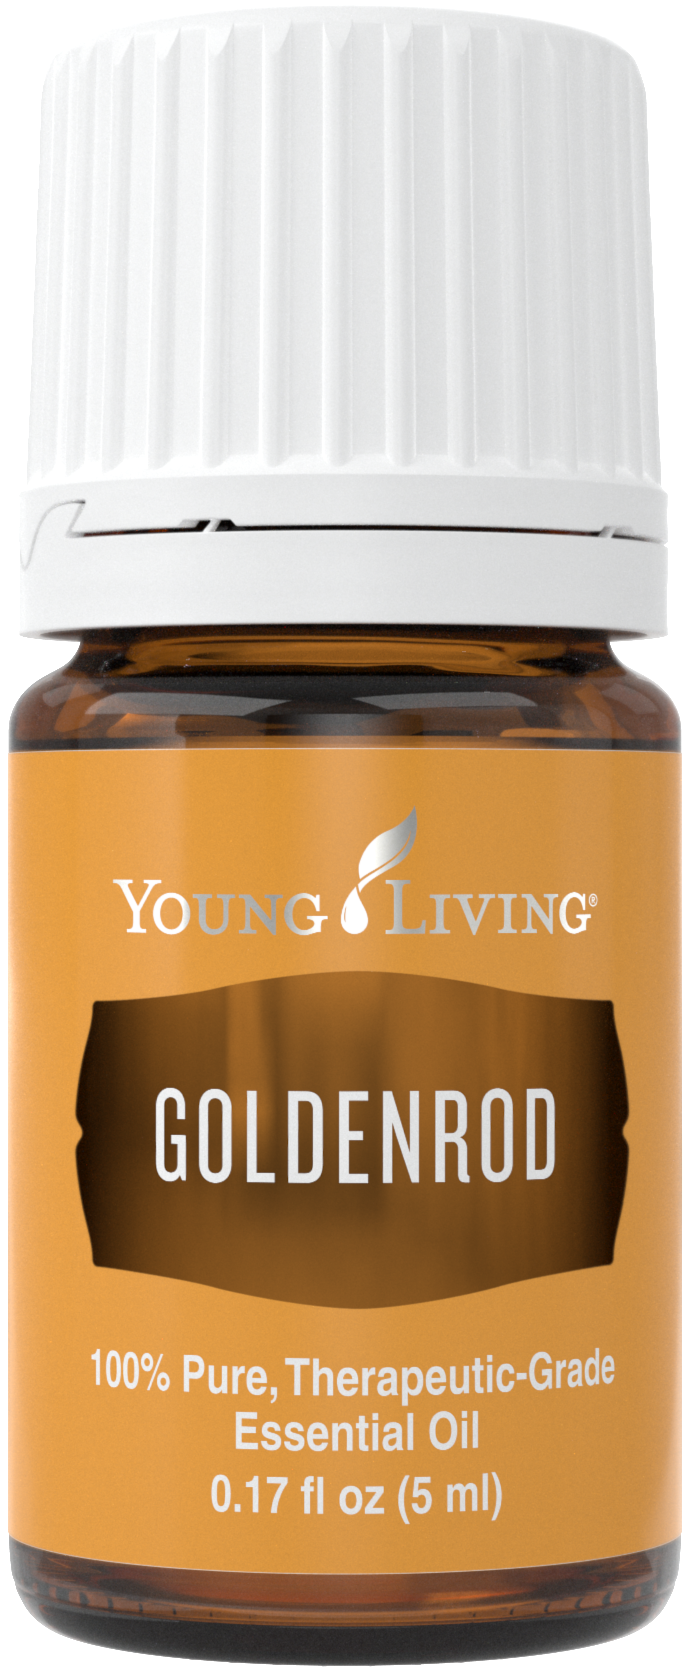 Goldenrod 5ml Silo.png